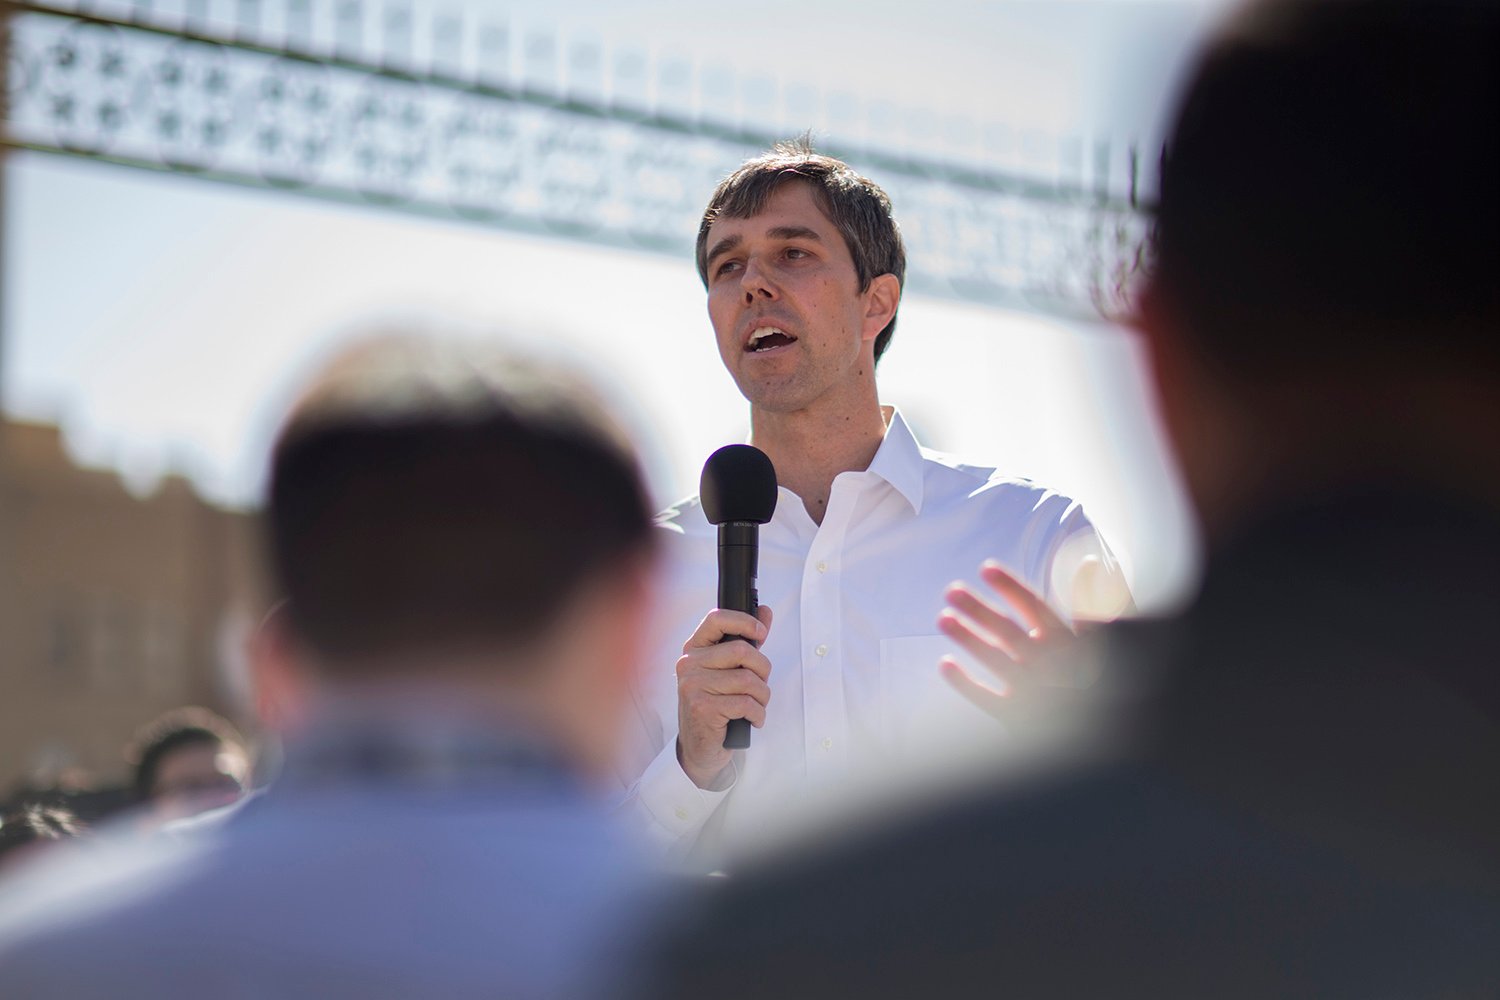 U.S. Rep. Beto O’Rourke announced his bid to run for U.S. Senate while speaking to supporters in El Paso on March 31, 2017. 